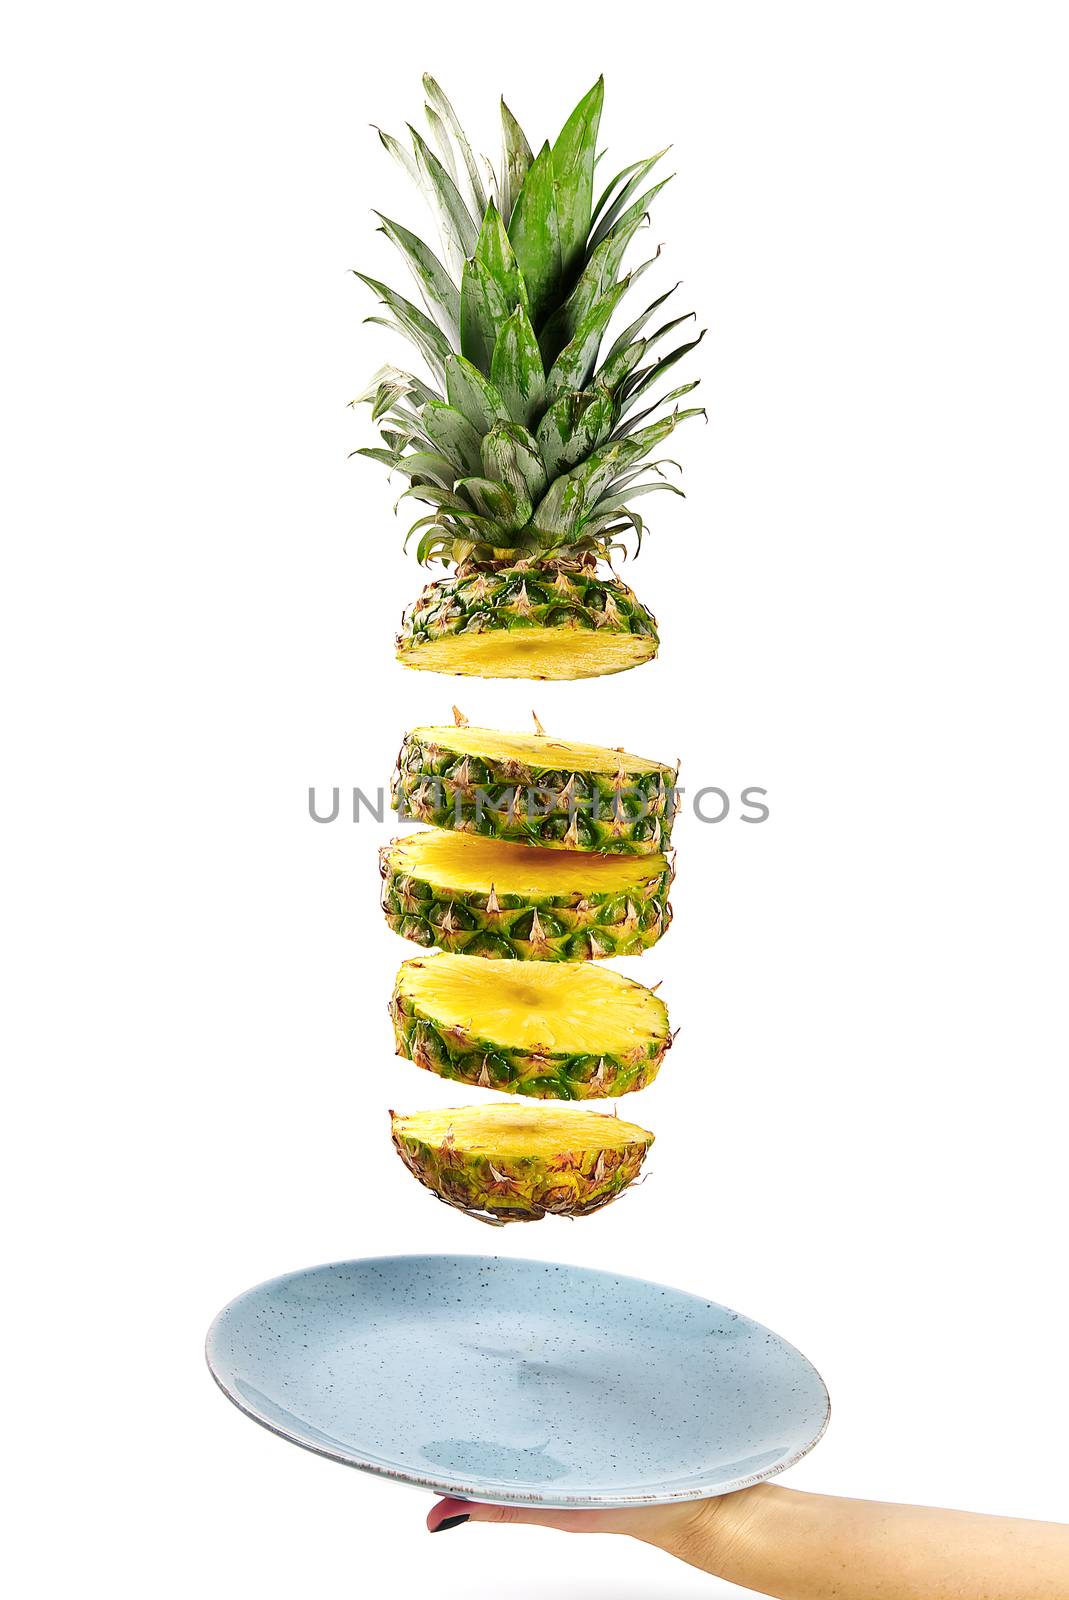 Pineapple fresh ananas. Pineapple sliced, levitates in the air. Tropical fruit. Concept of summer mood on white background, isolate.